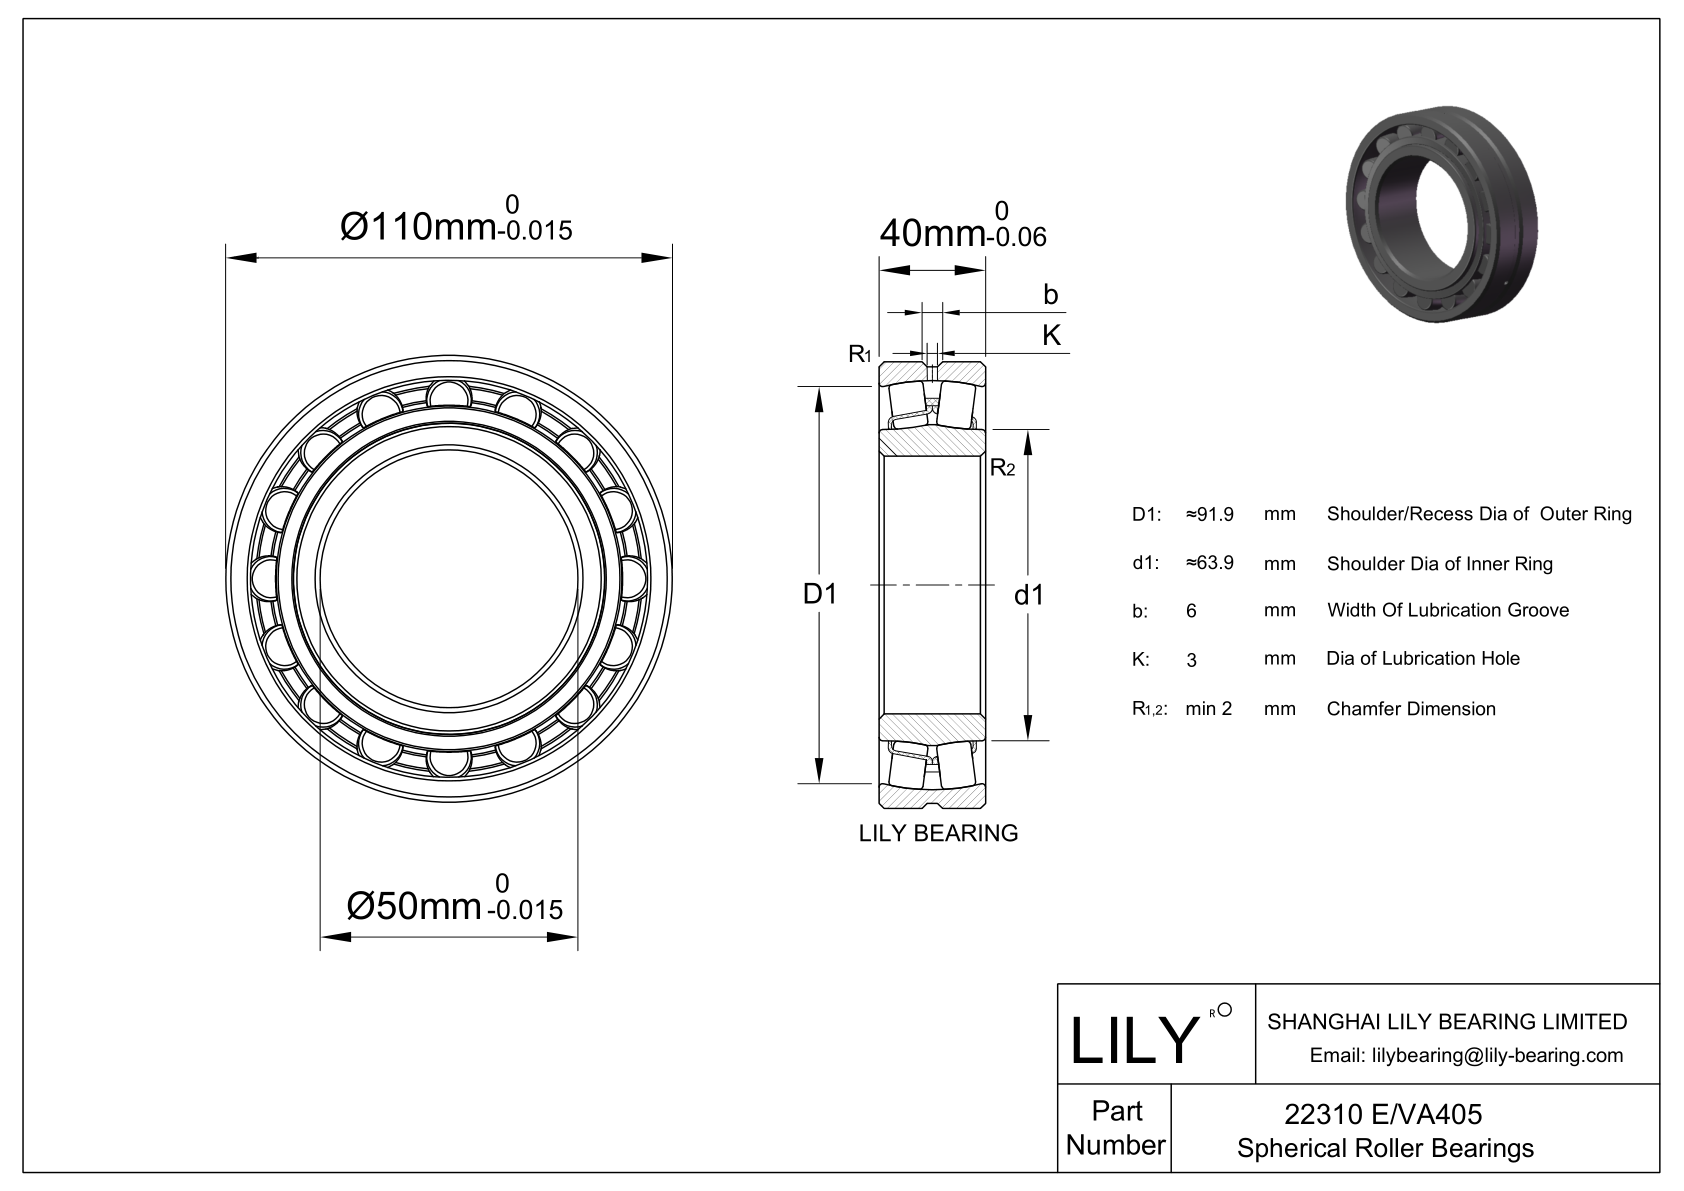 22310 E/VA405 Double Row Spherical Roller Bearing cad drawing